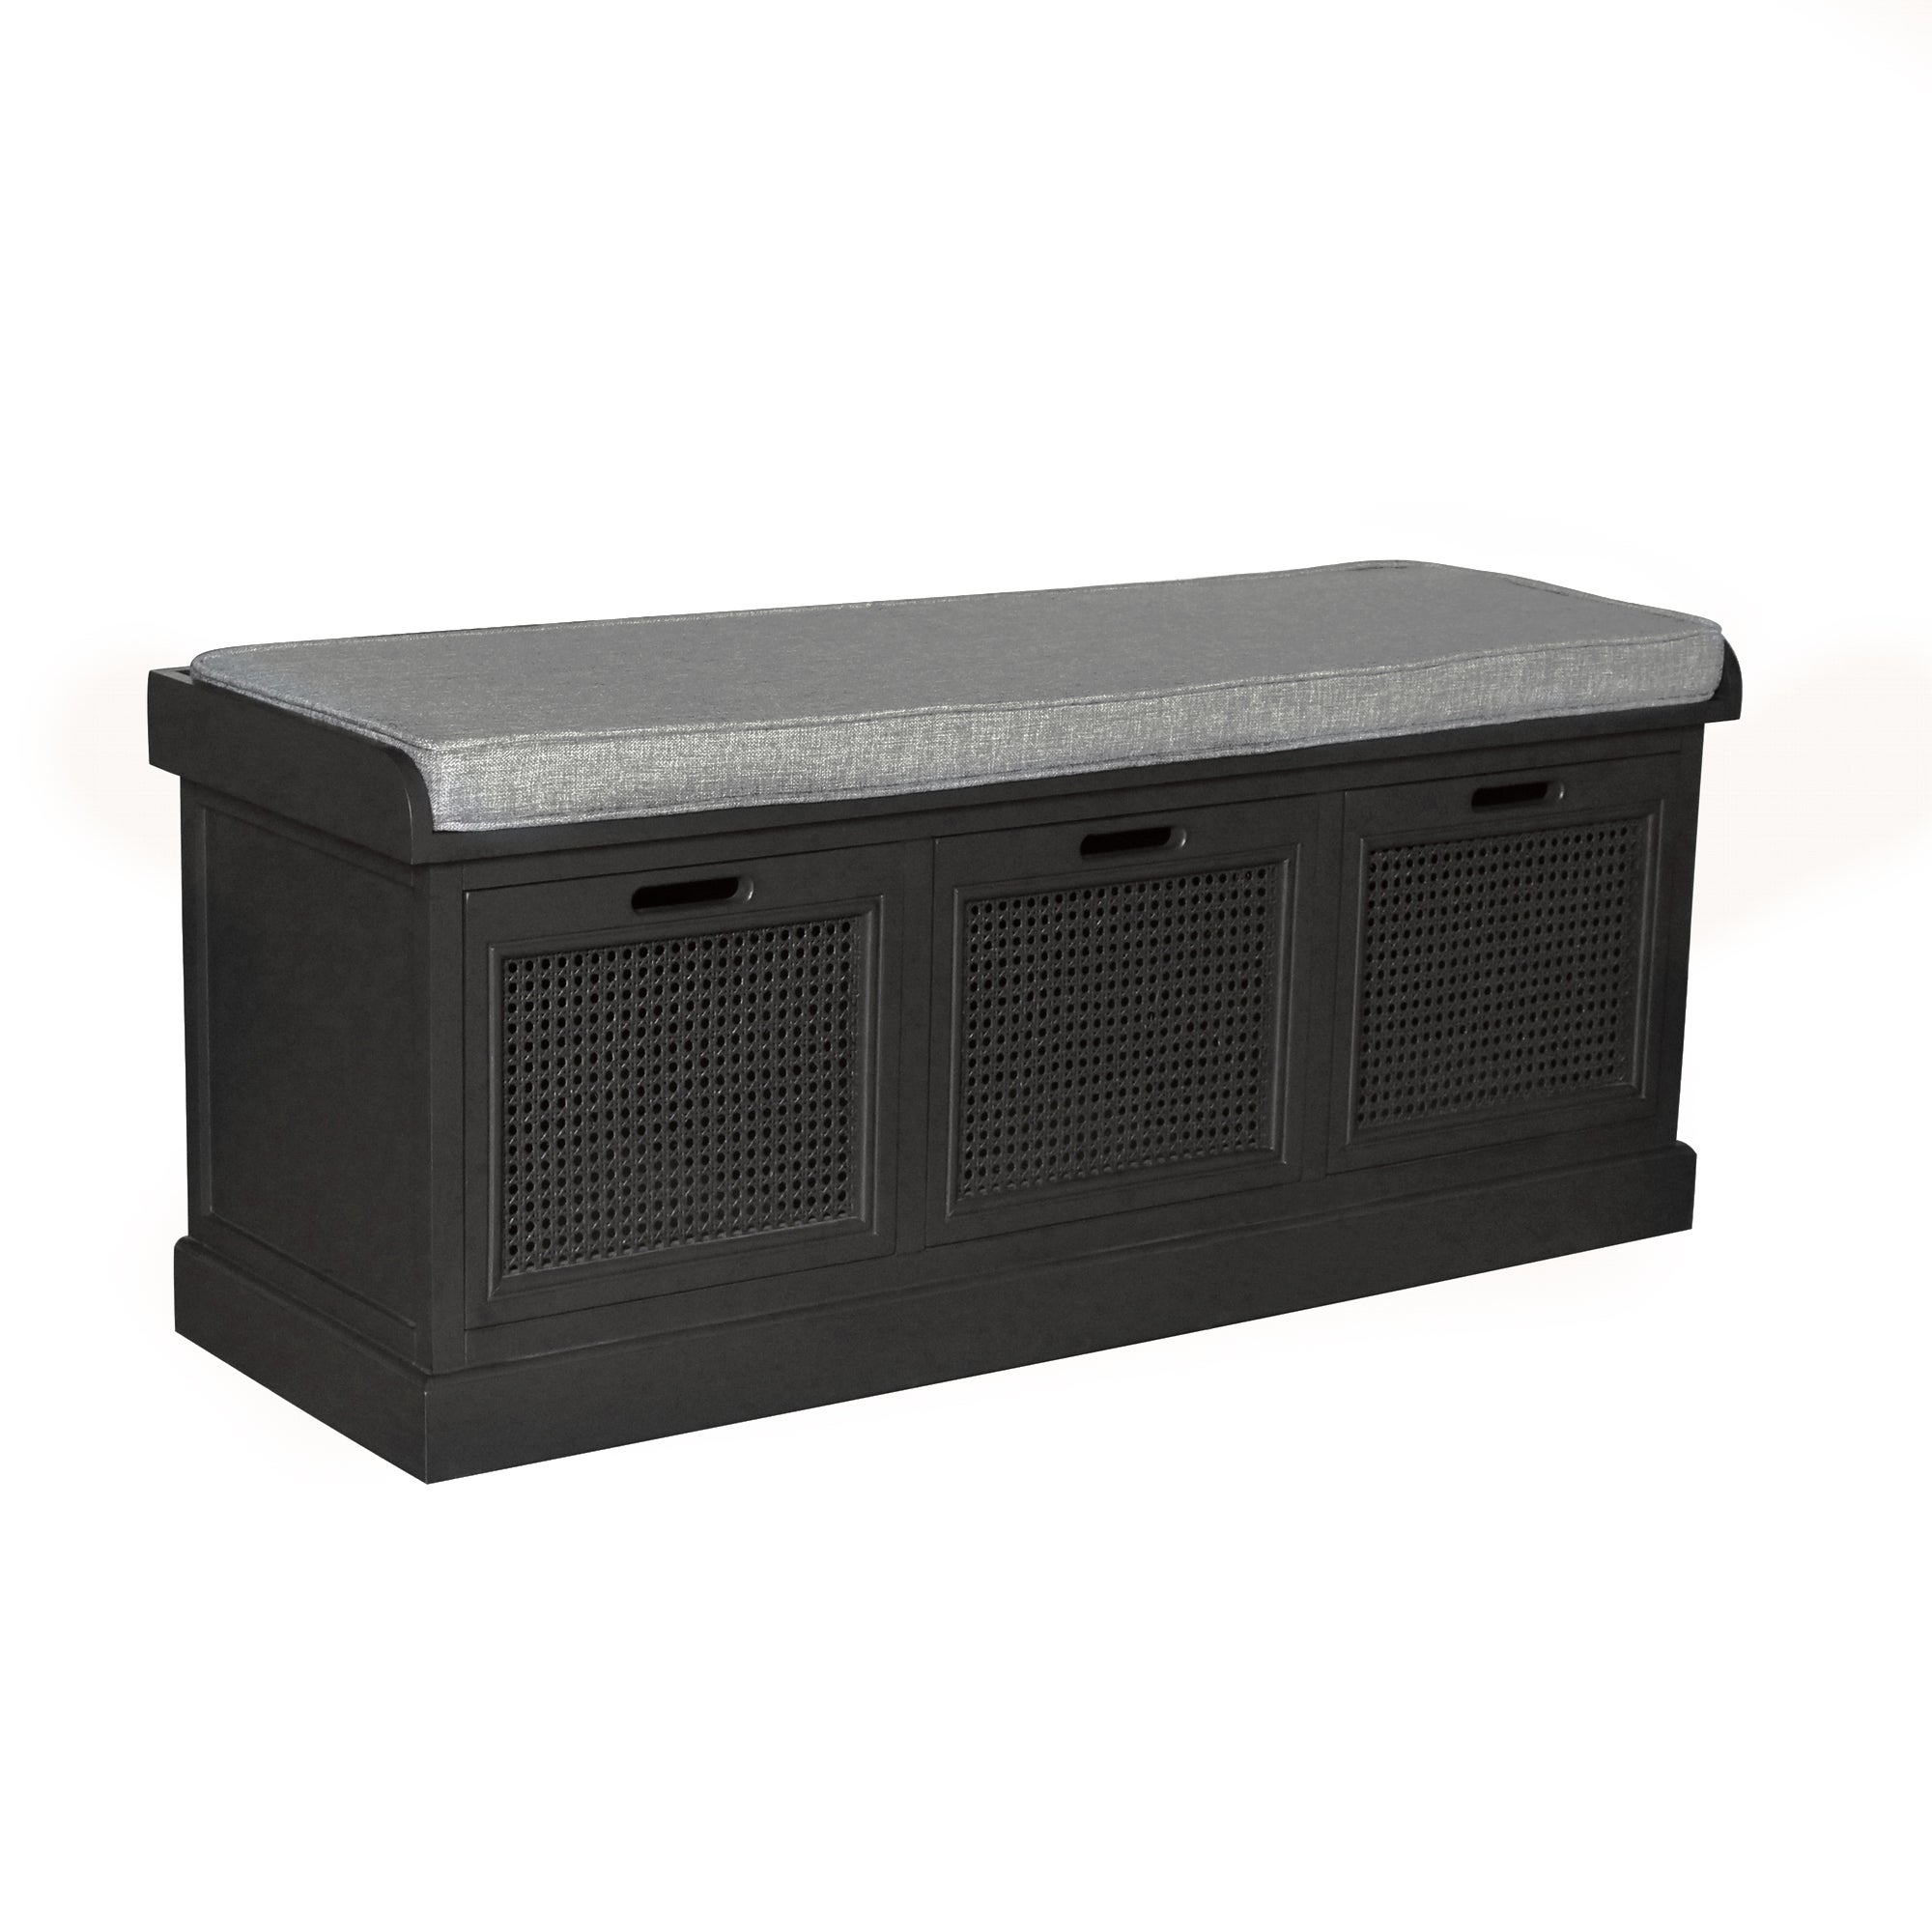 Lucy Cane Charcoal Storage Bench | Dunelm